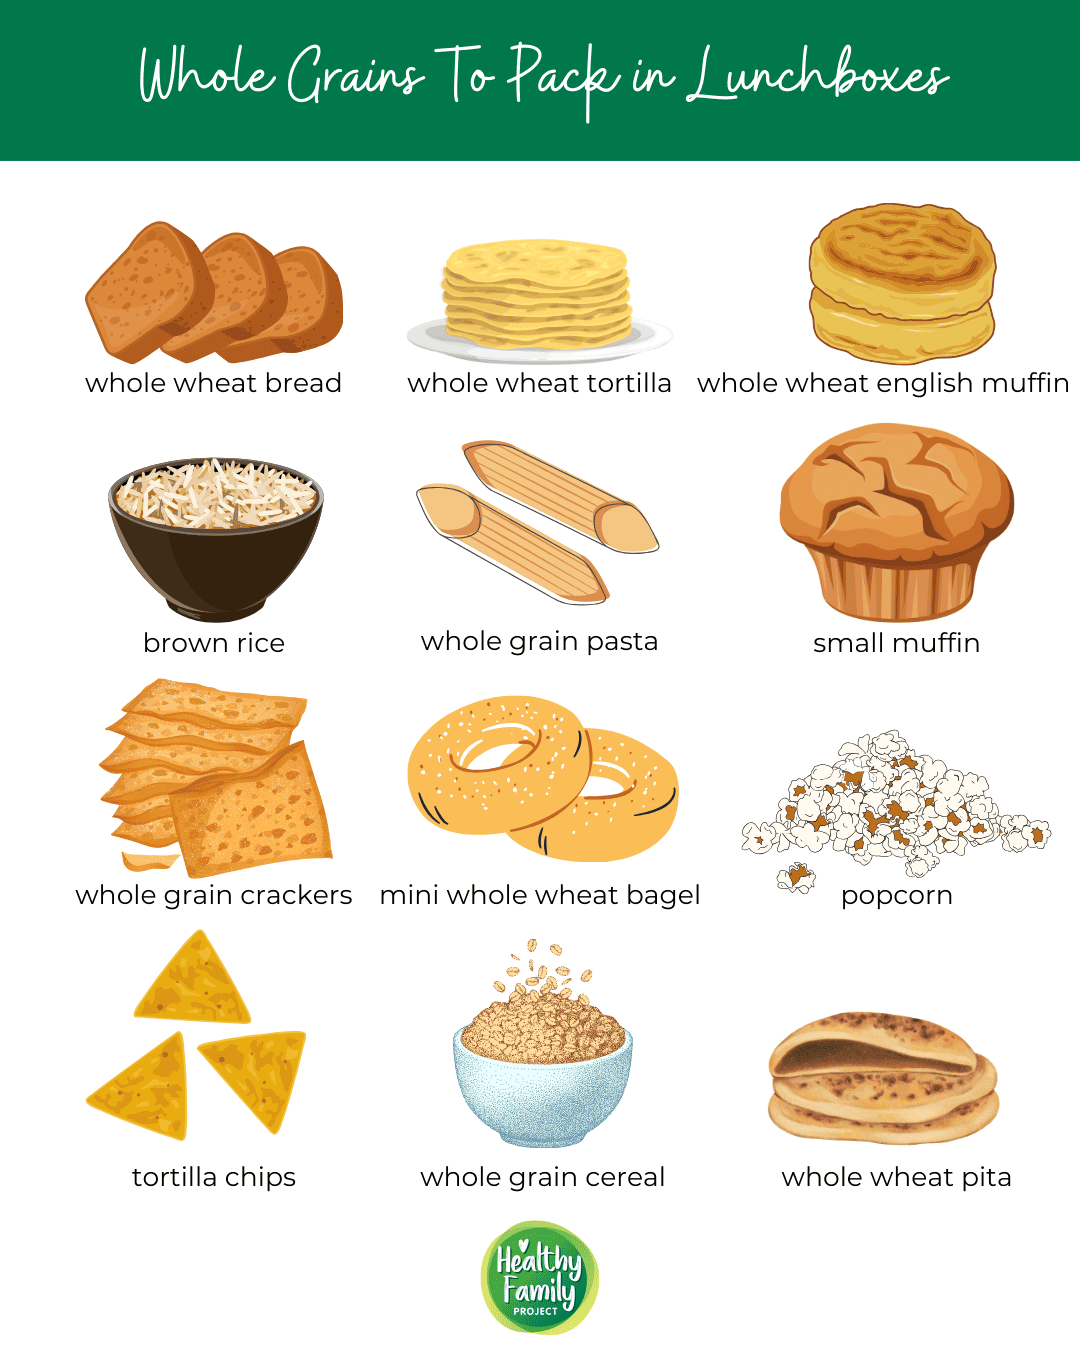 Whole Grains To Pack in Lunchboxes Infographic